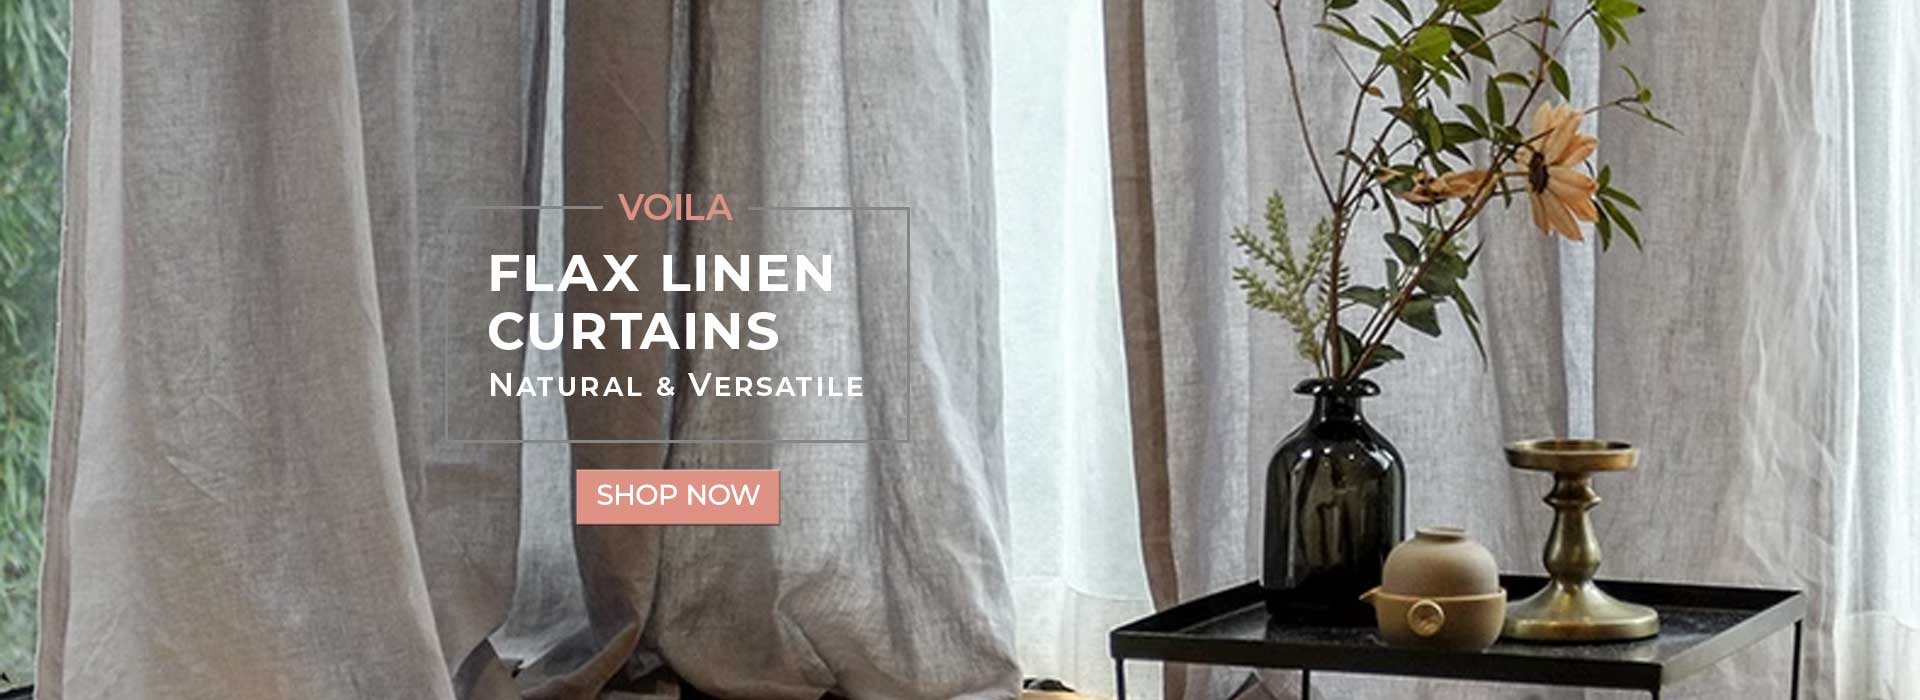 100% Pure Flax Linen Curtains